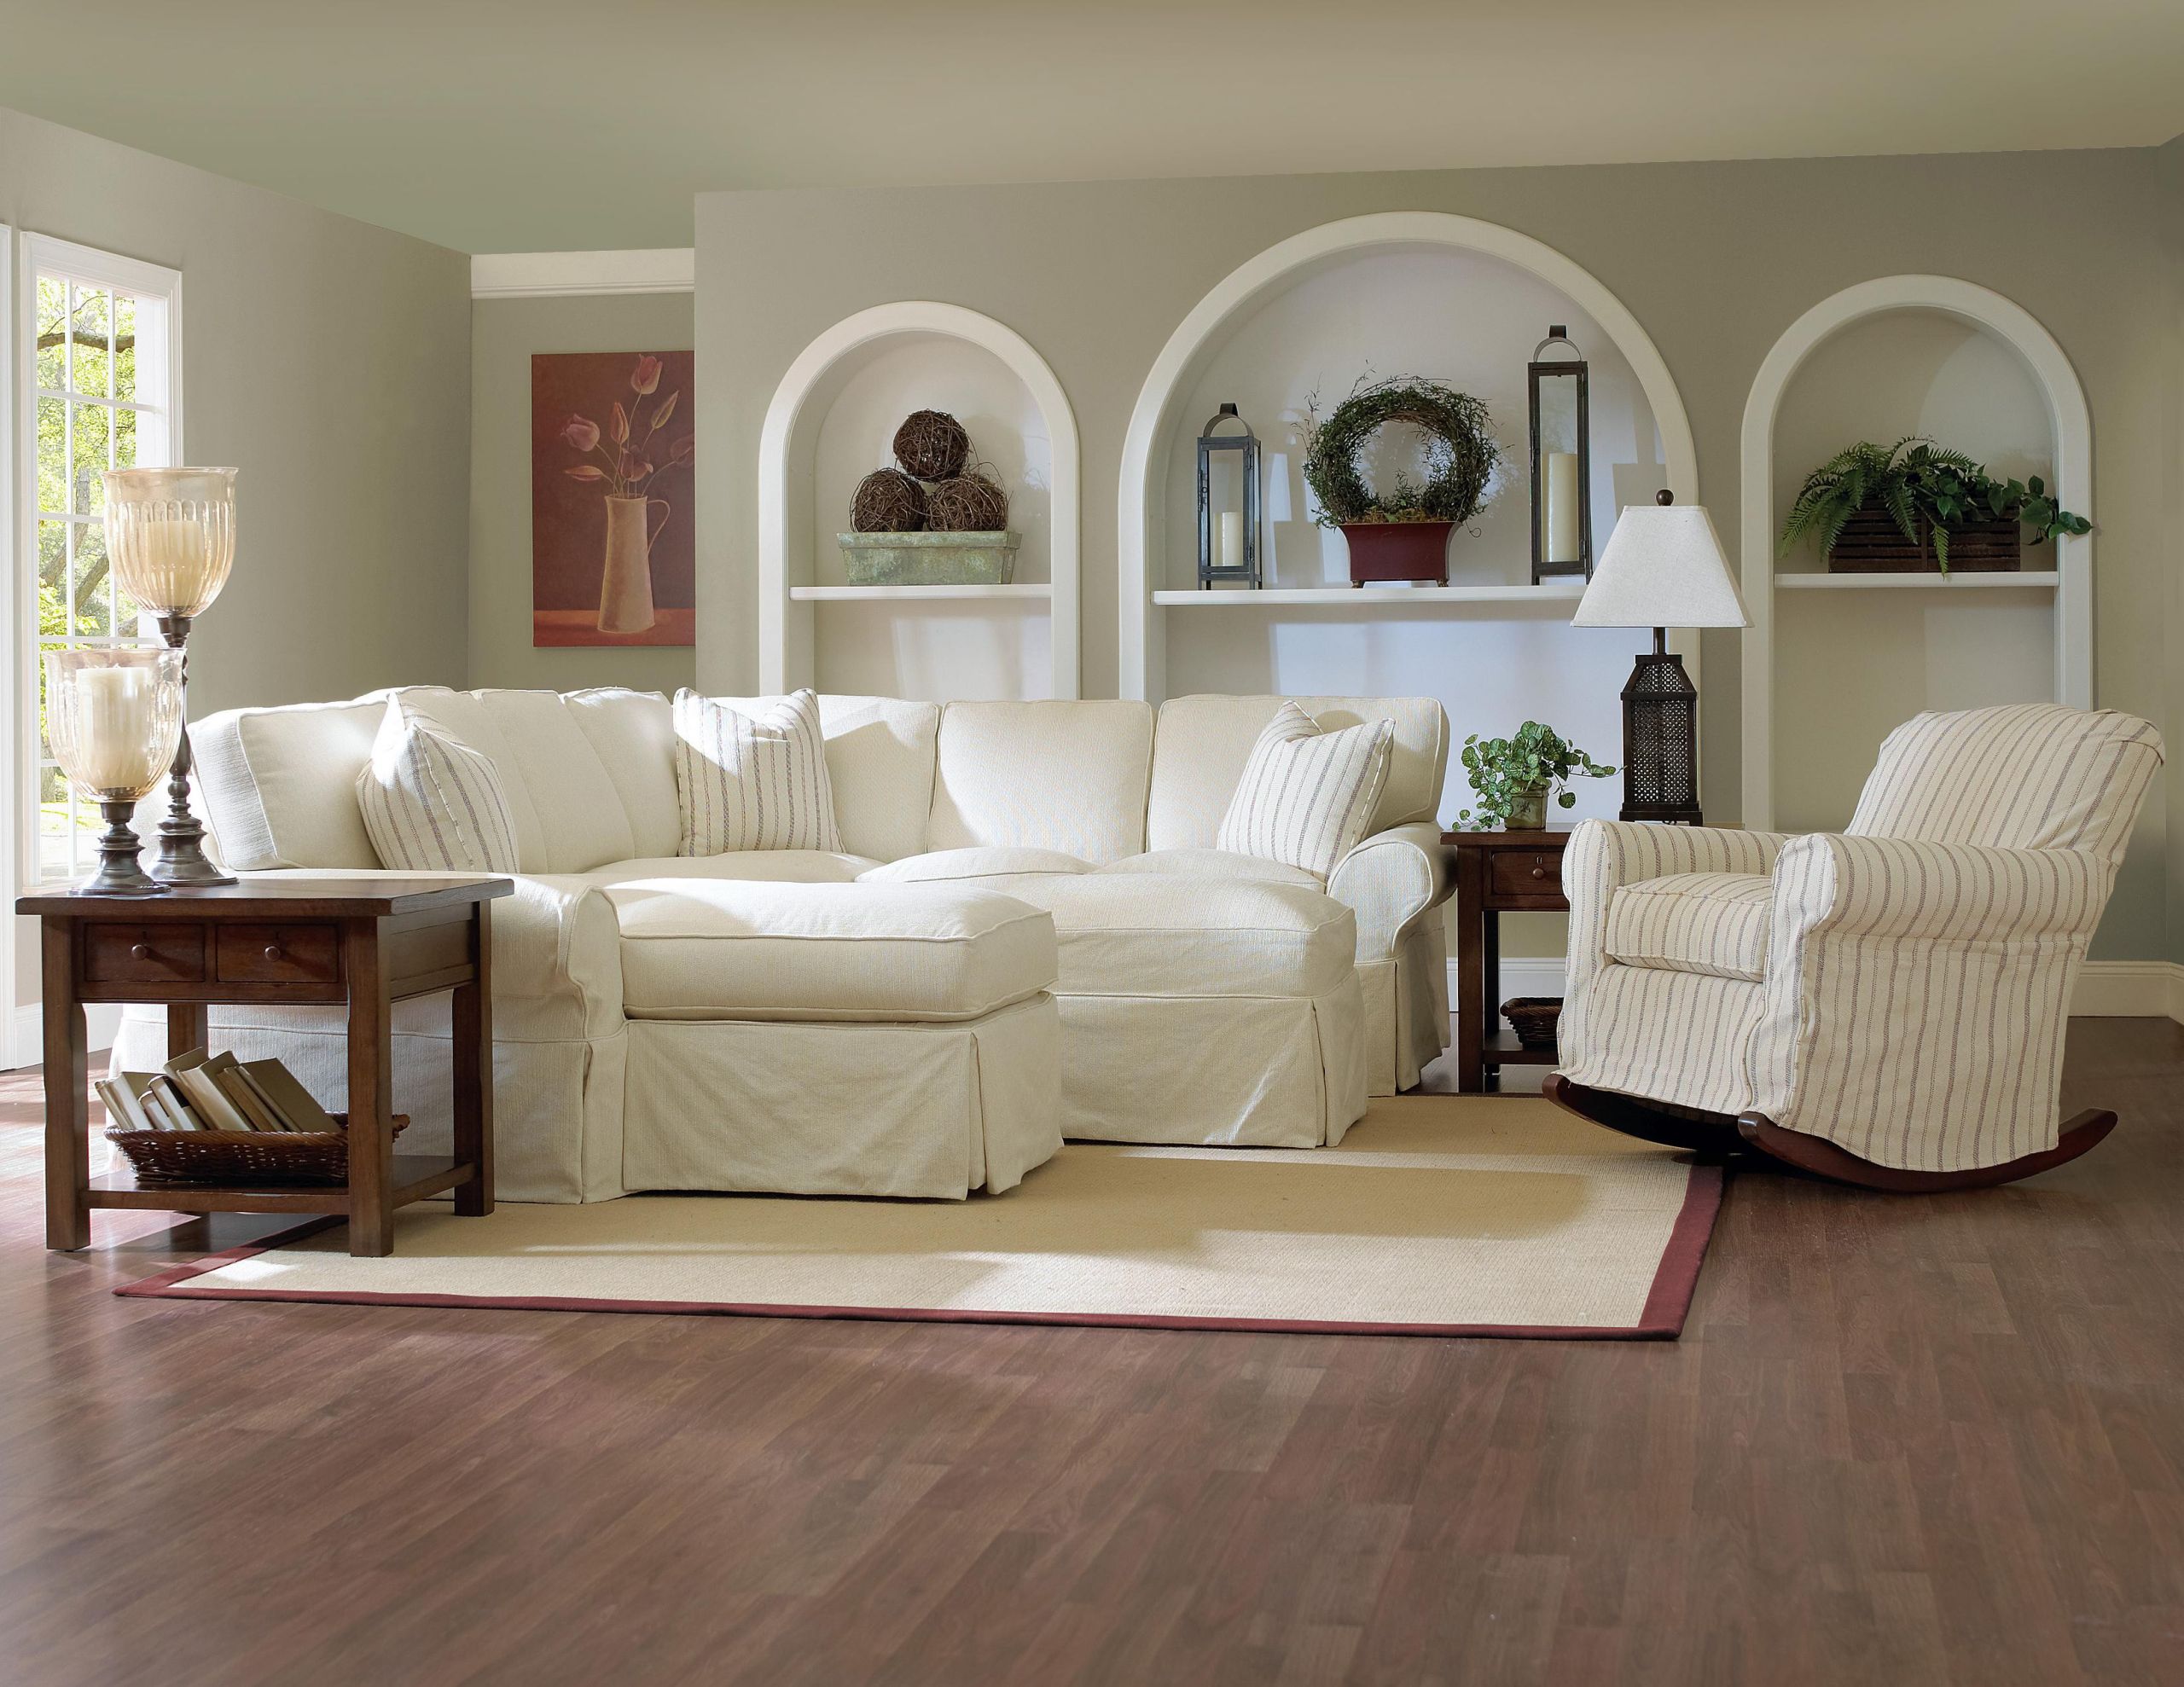 Living Room Chair Slipcovers
 Awesome Slipcovers For Sectional Couches